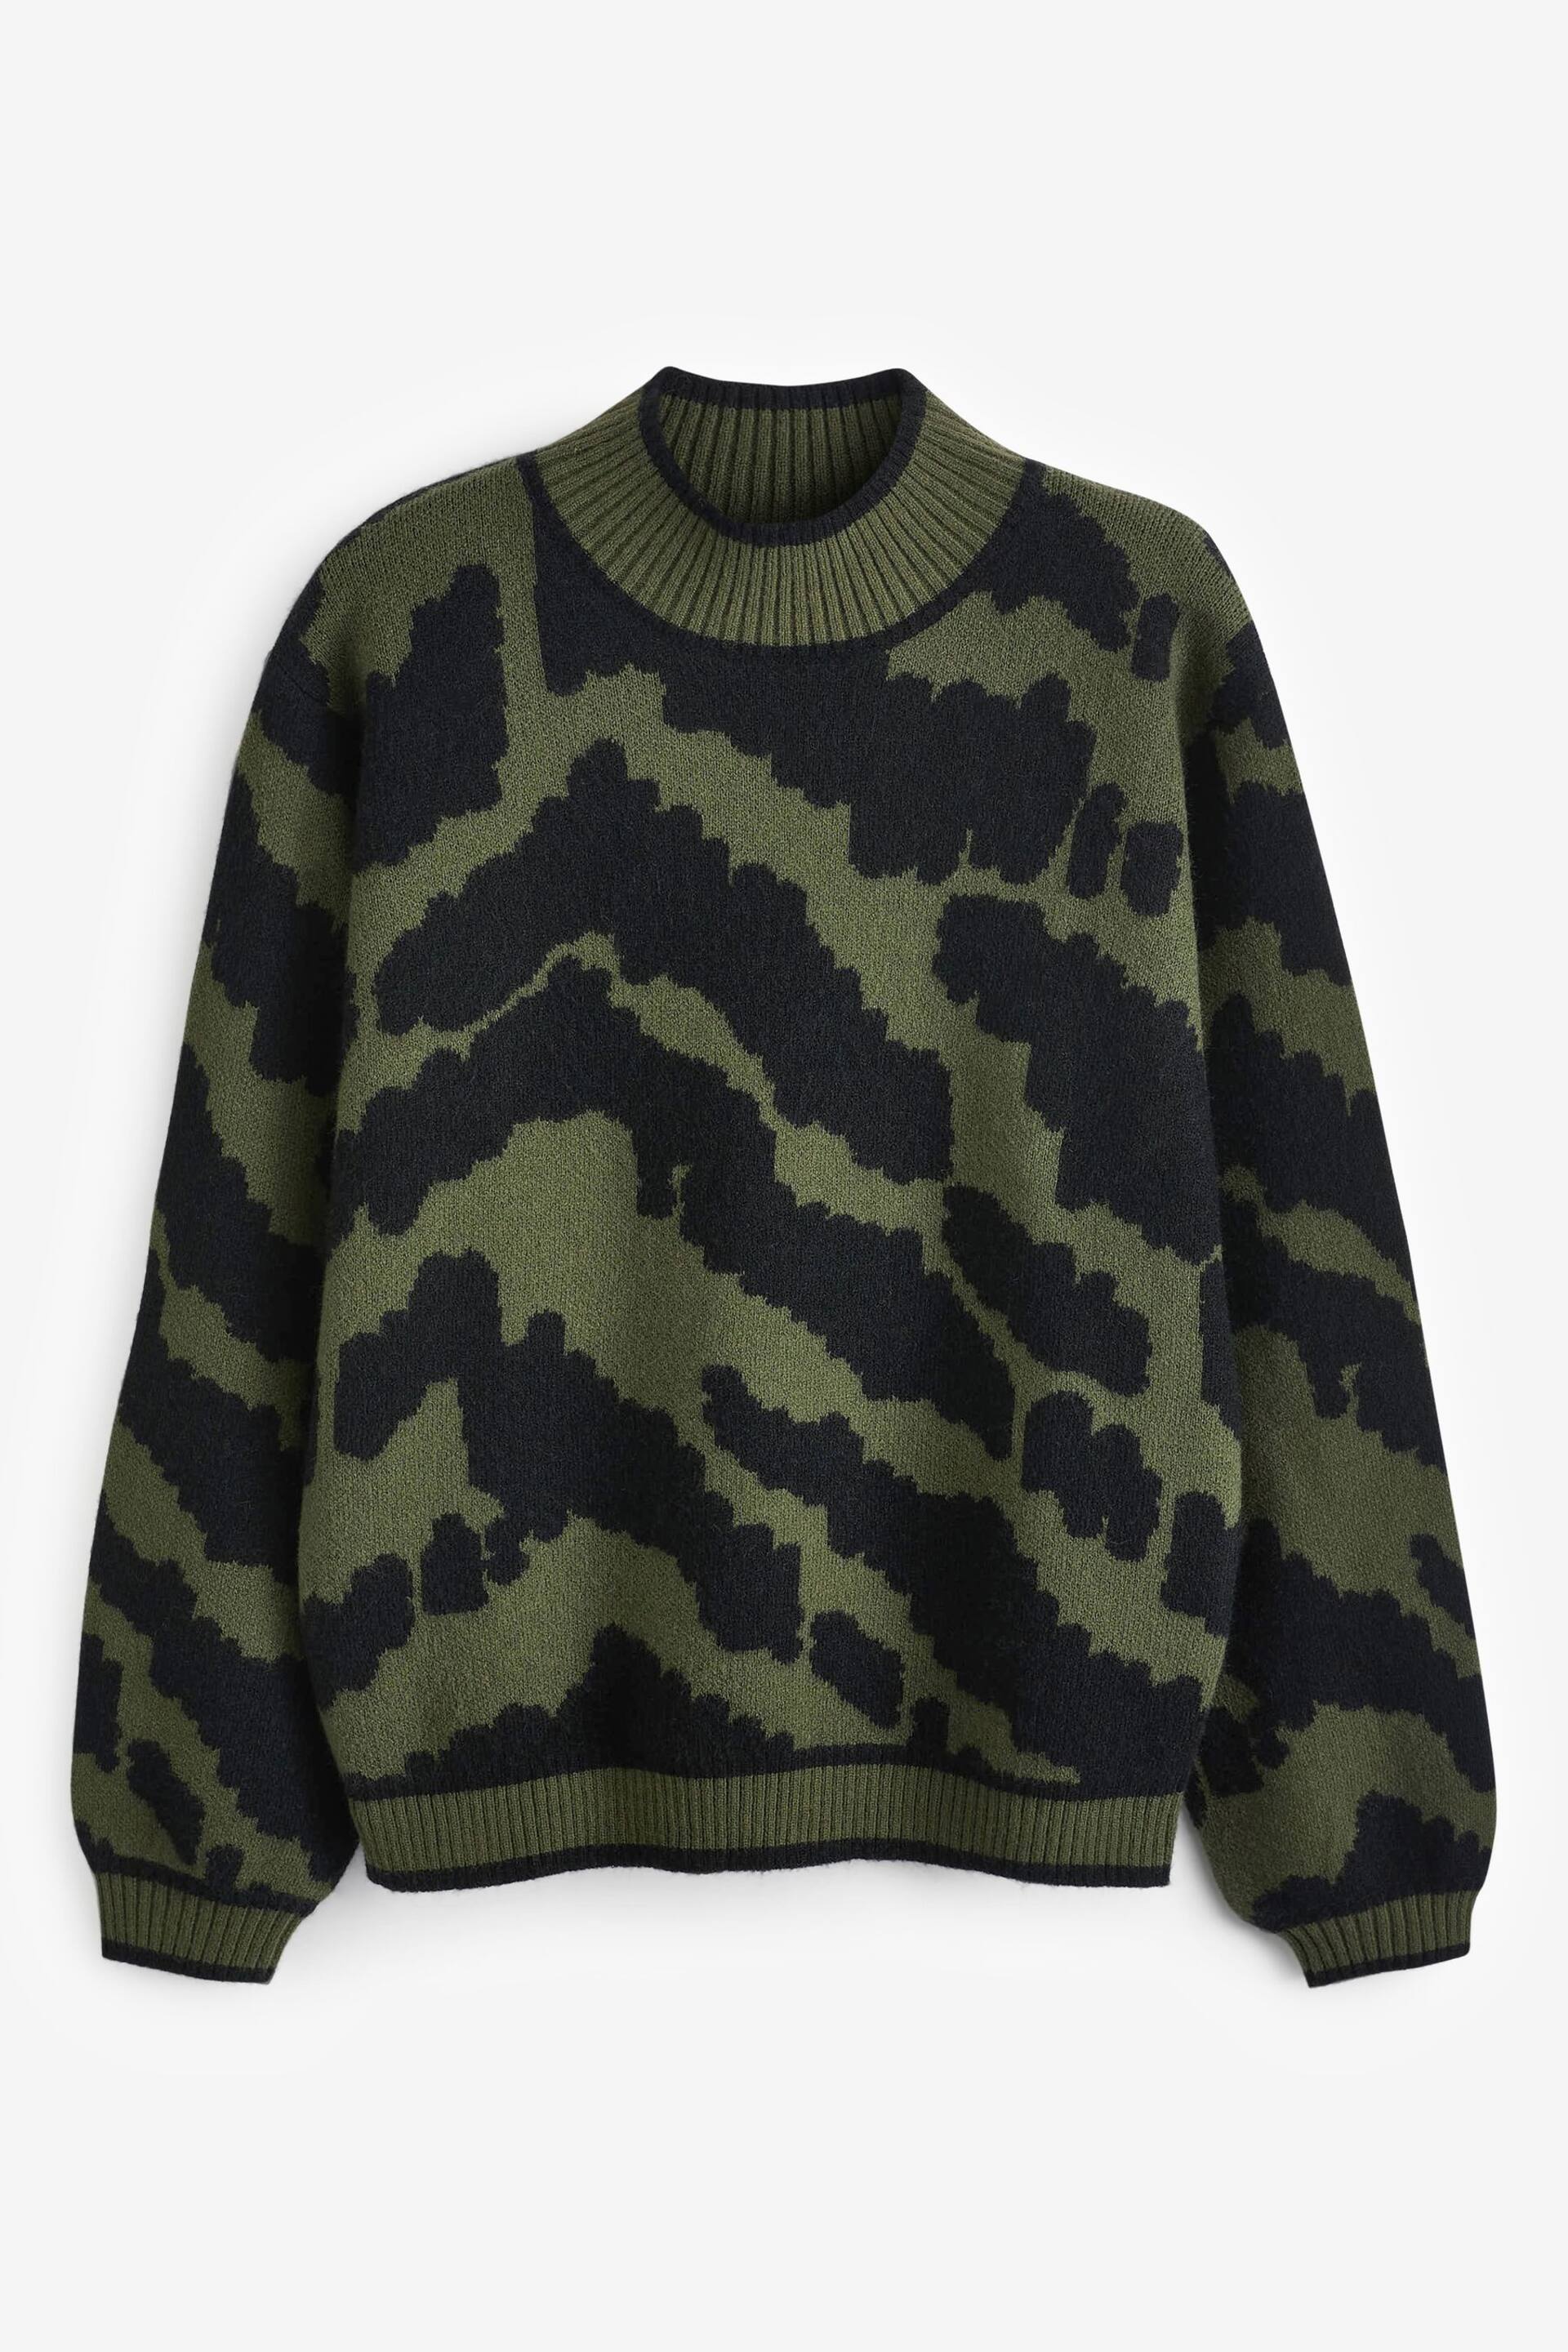 South Beach Green Funnel Neck Knit Jumper - Image 4 of 4